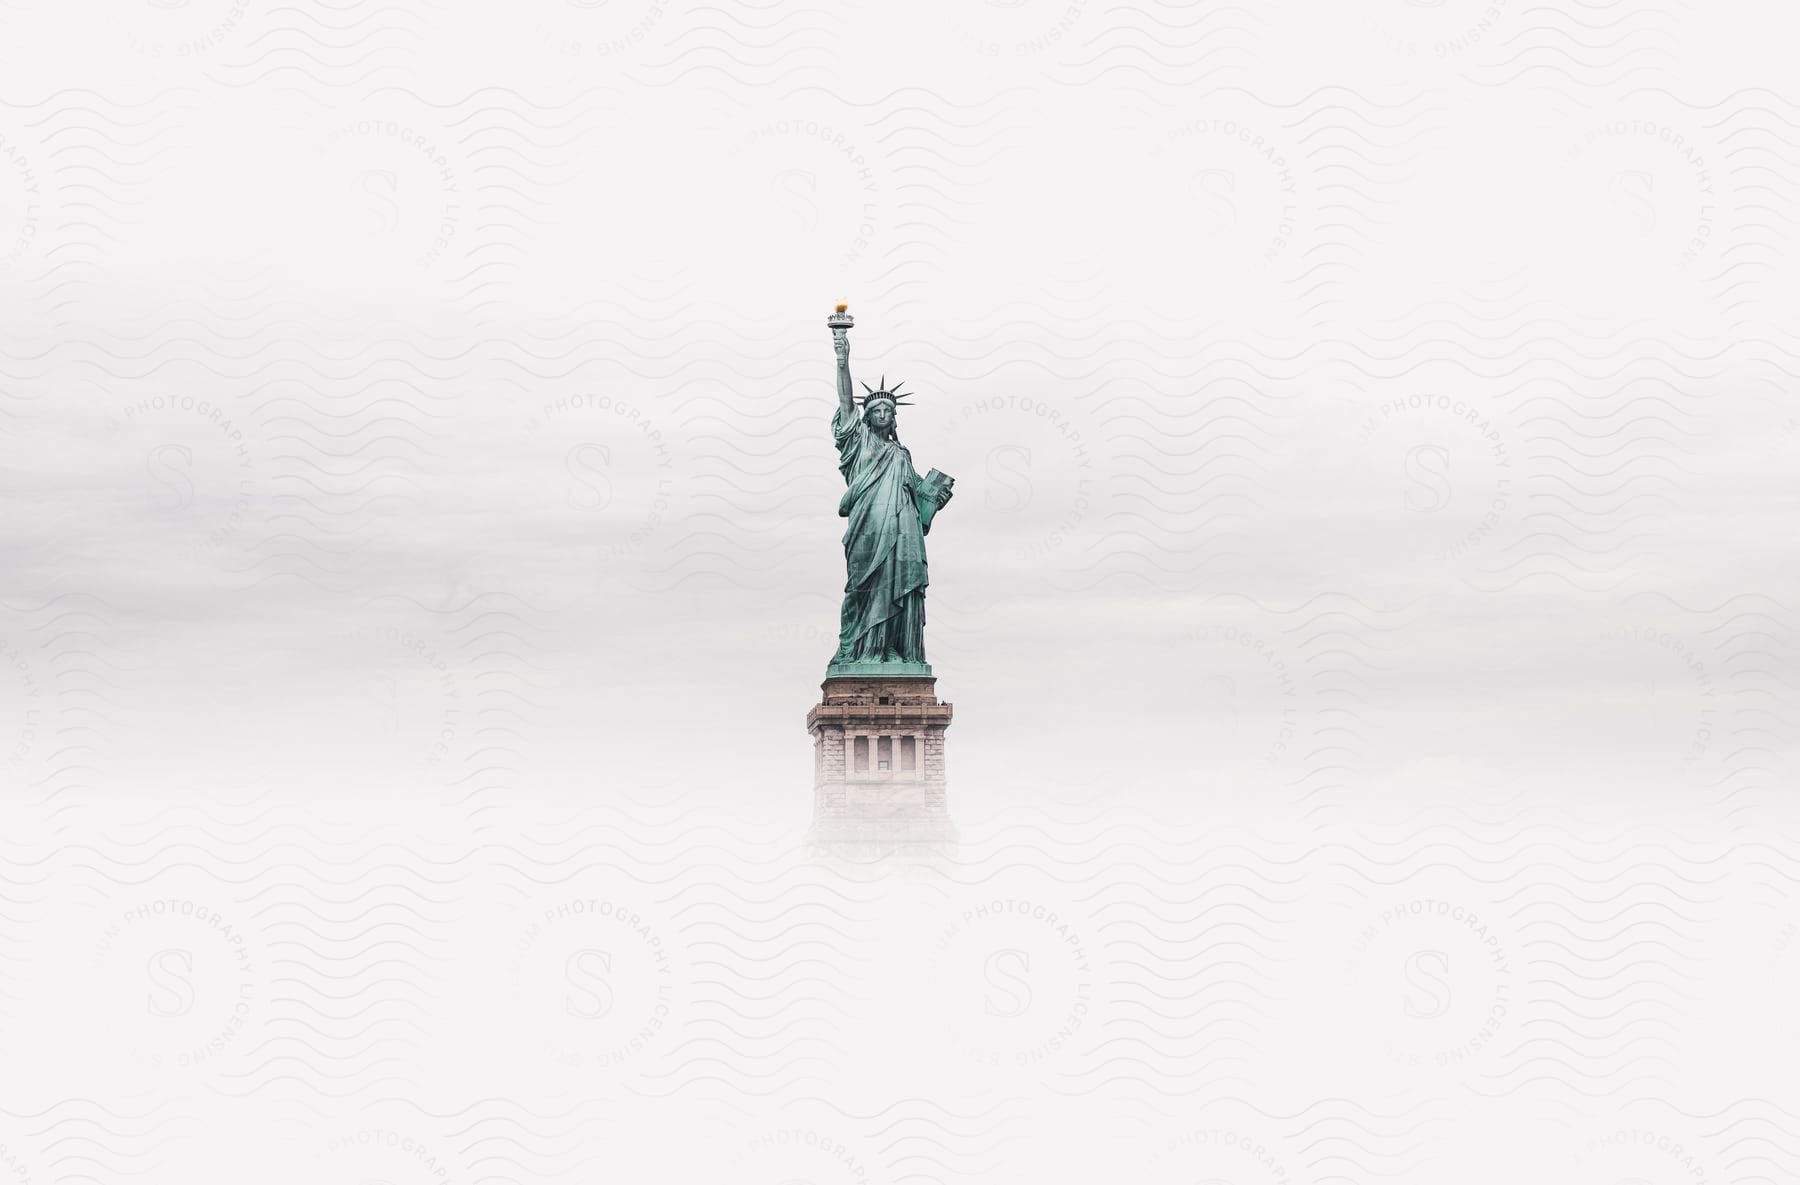 Digital artwork of the statue of liberty surrounded by mist in new york city